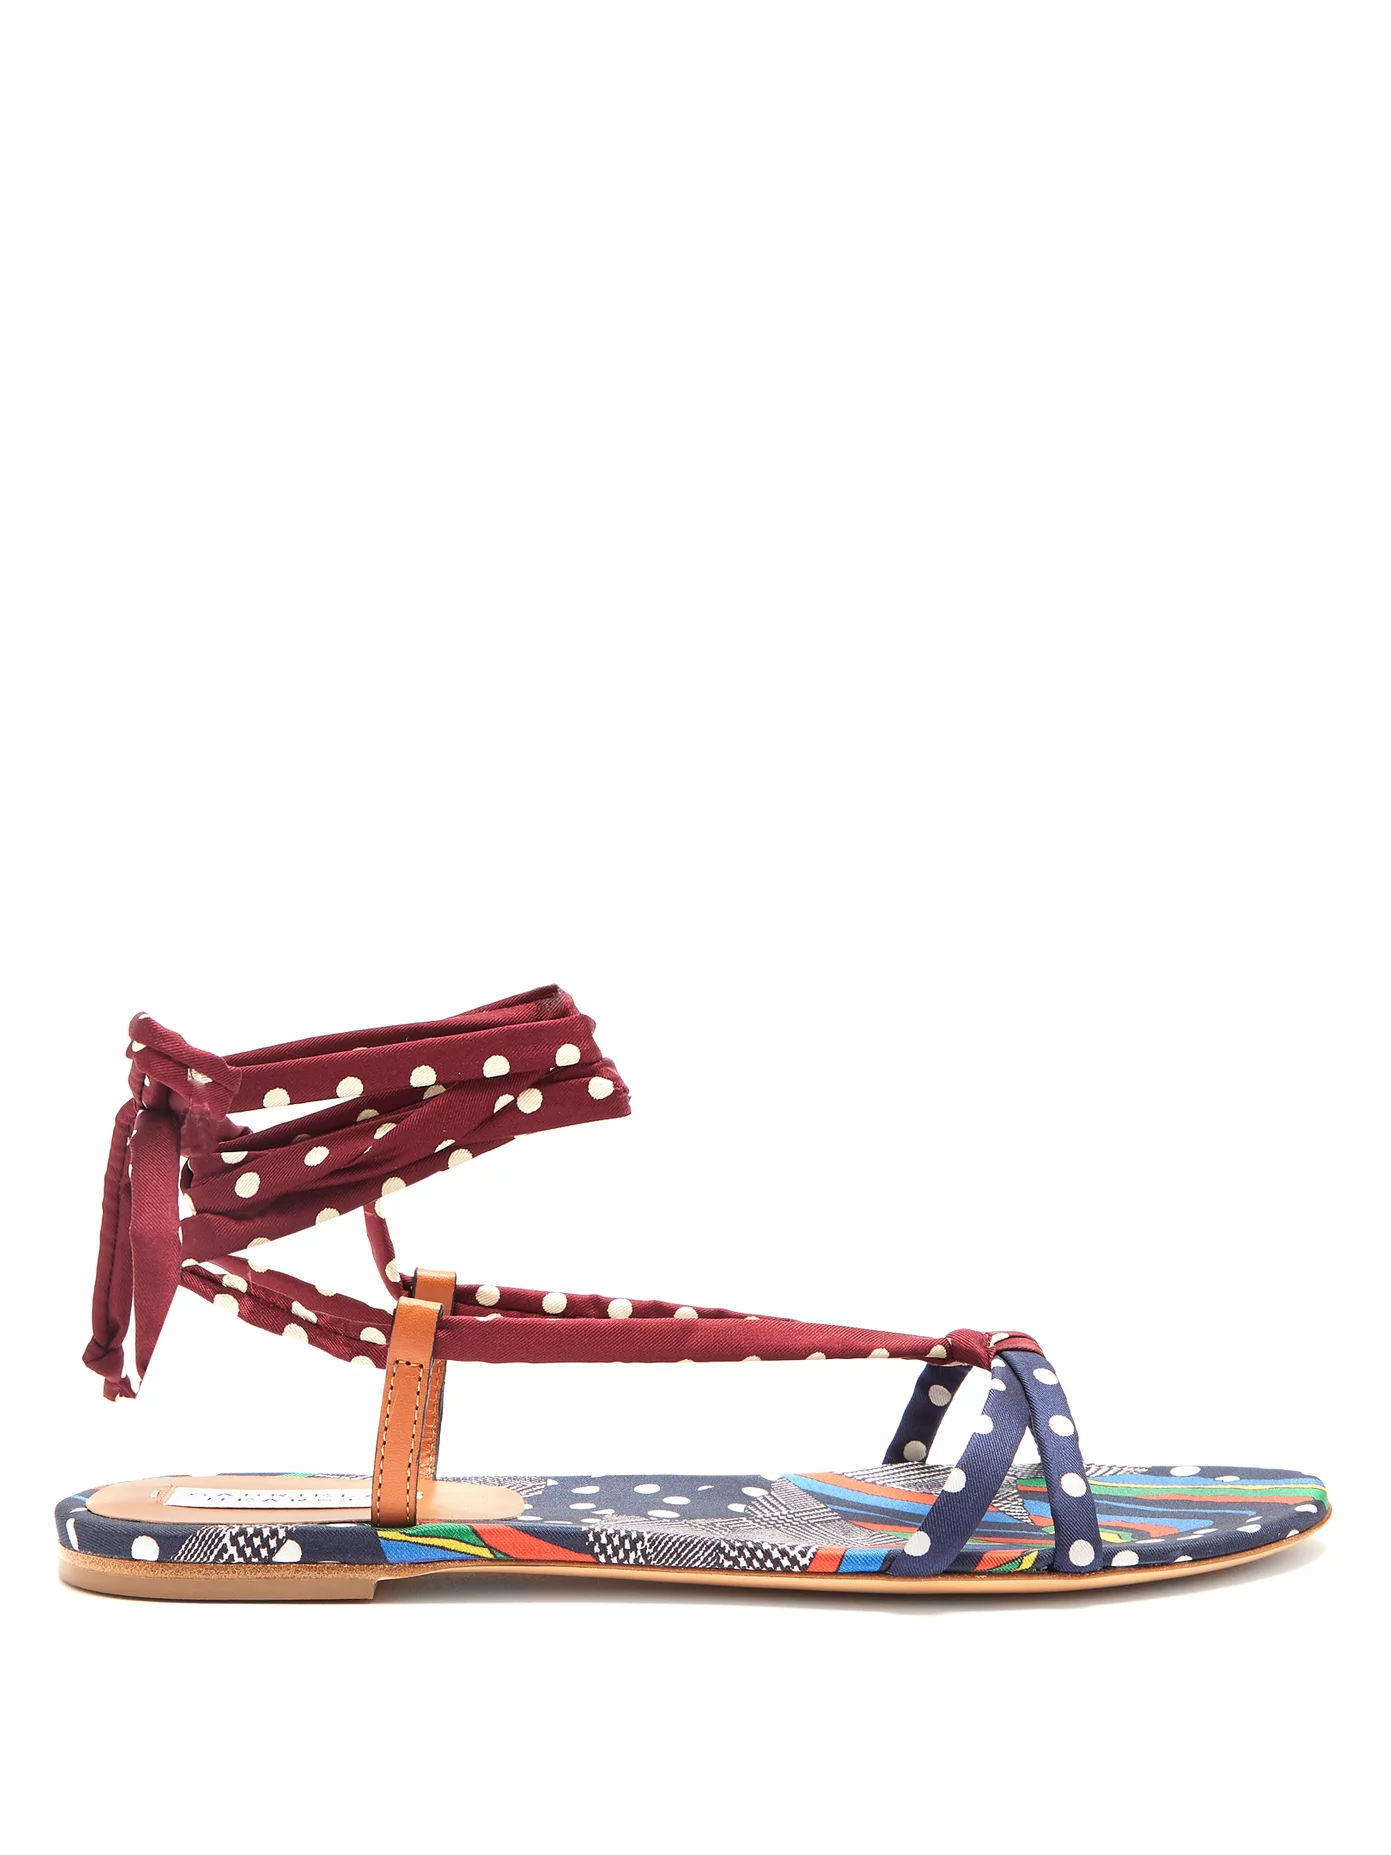 is this the new gladiator sandal?